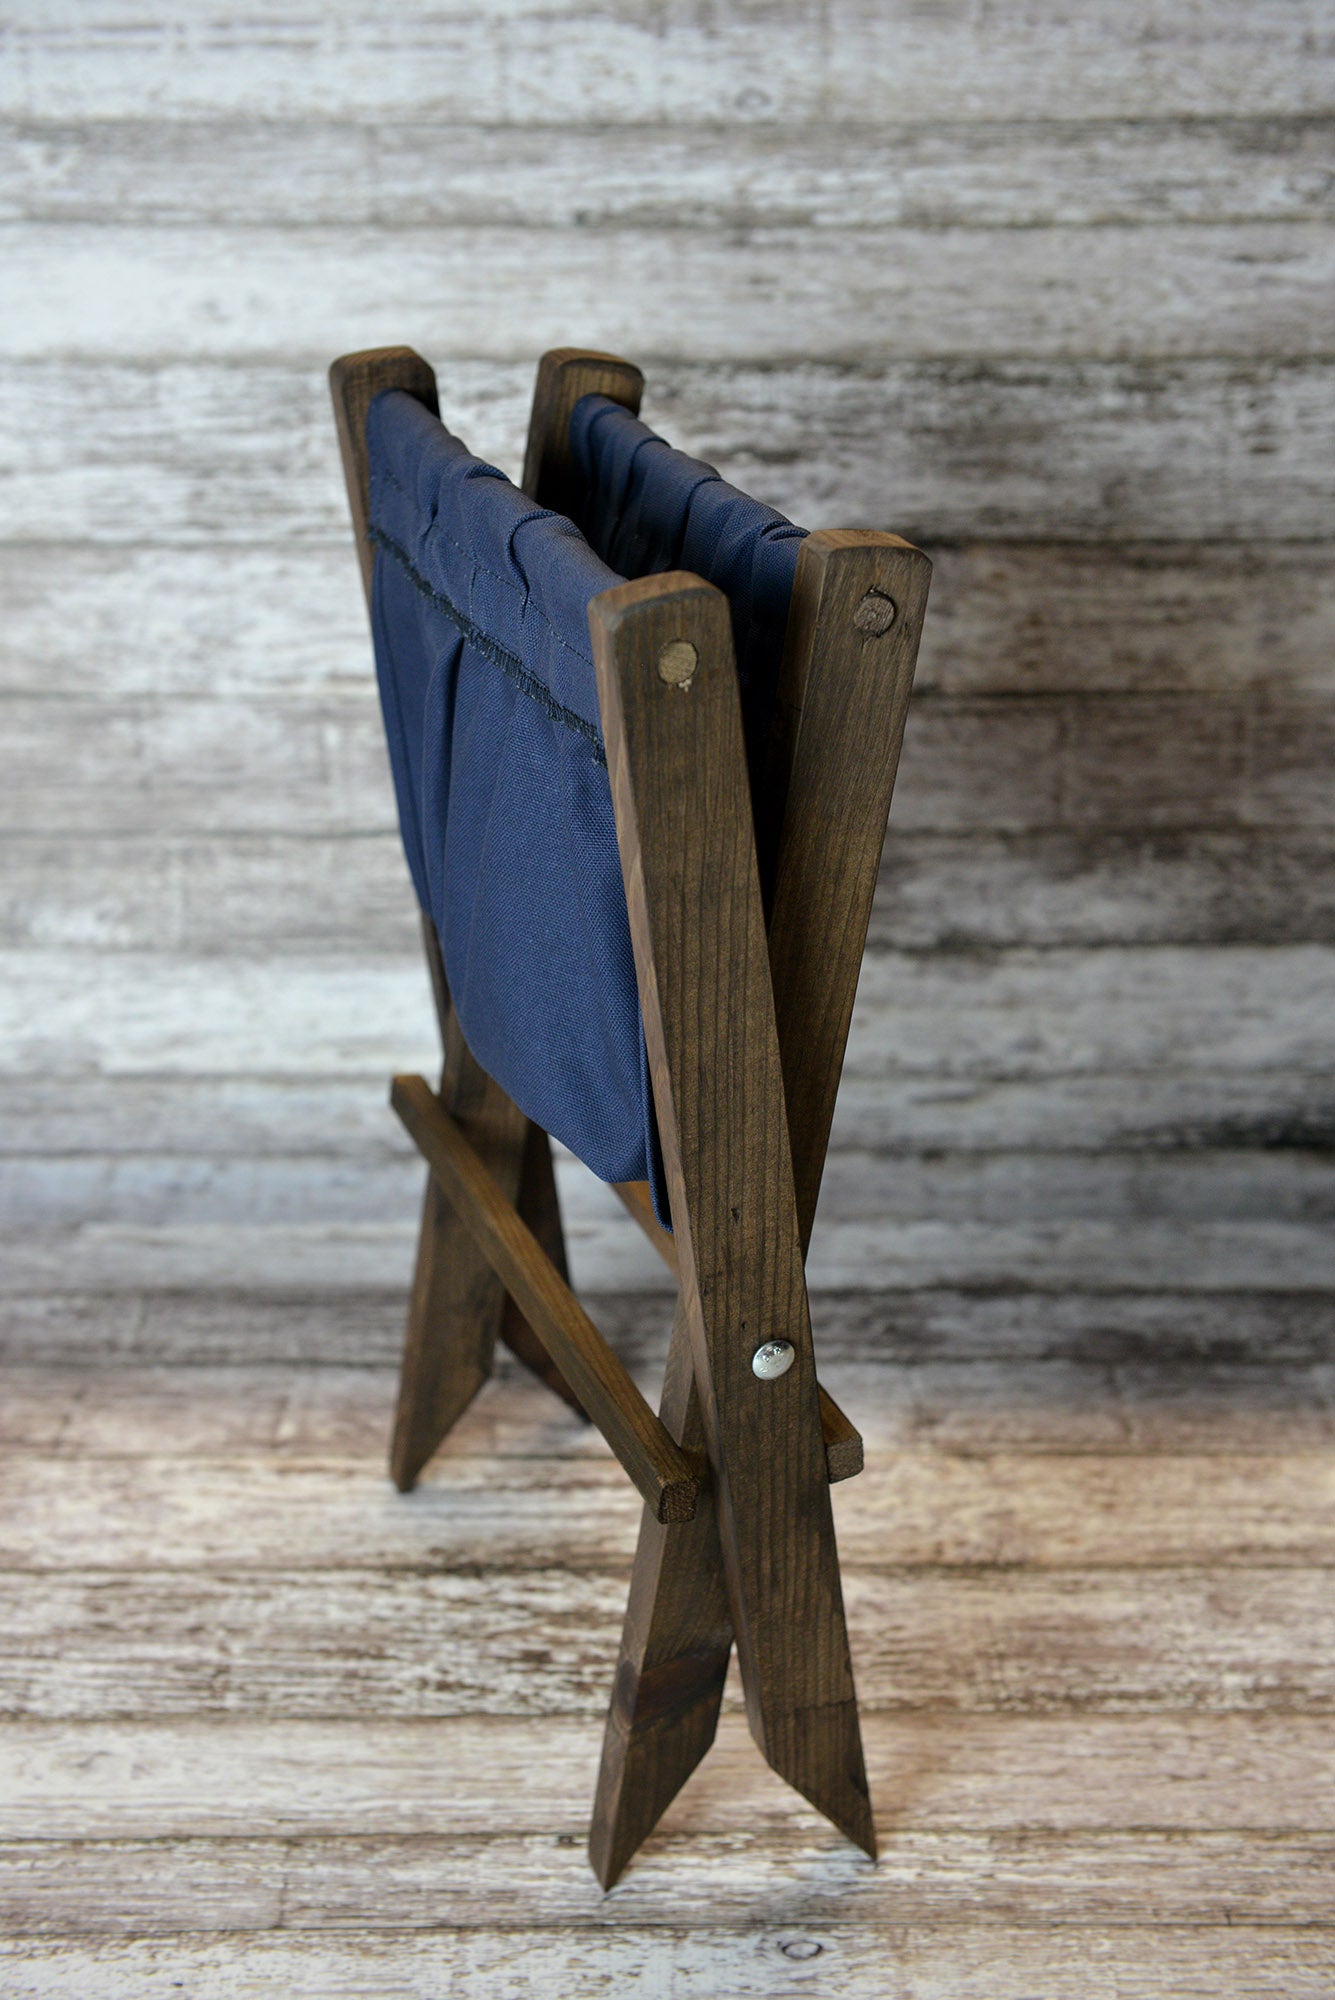 Rustic Deck Chair AND Matching Pillow - Navy Canvas - Interchangeable-Newborn Photography Props